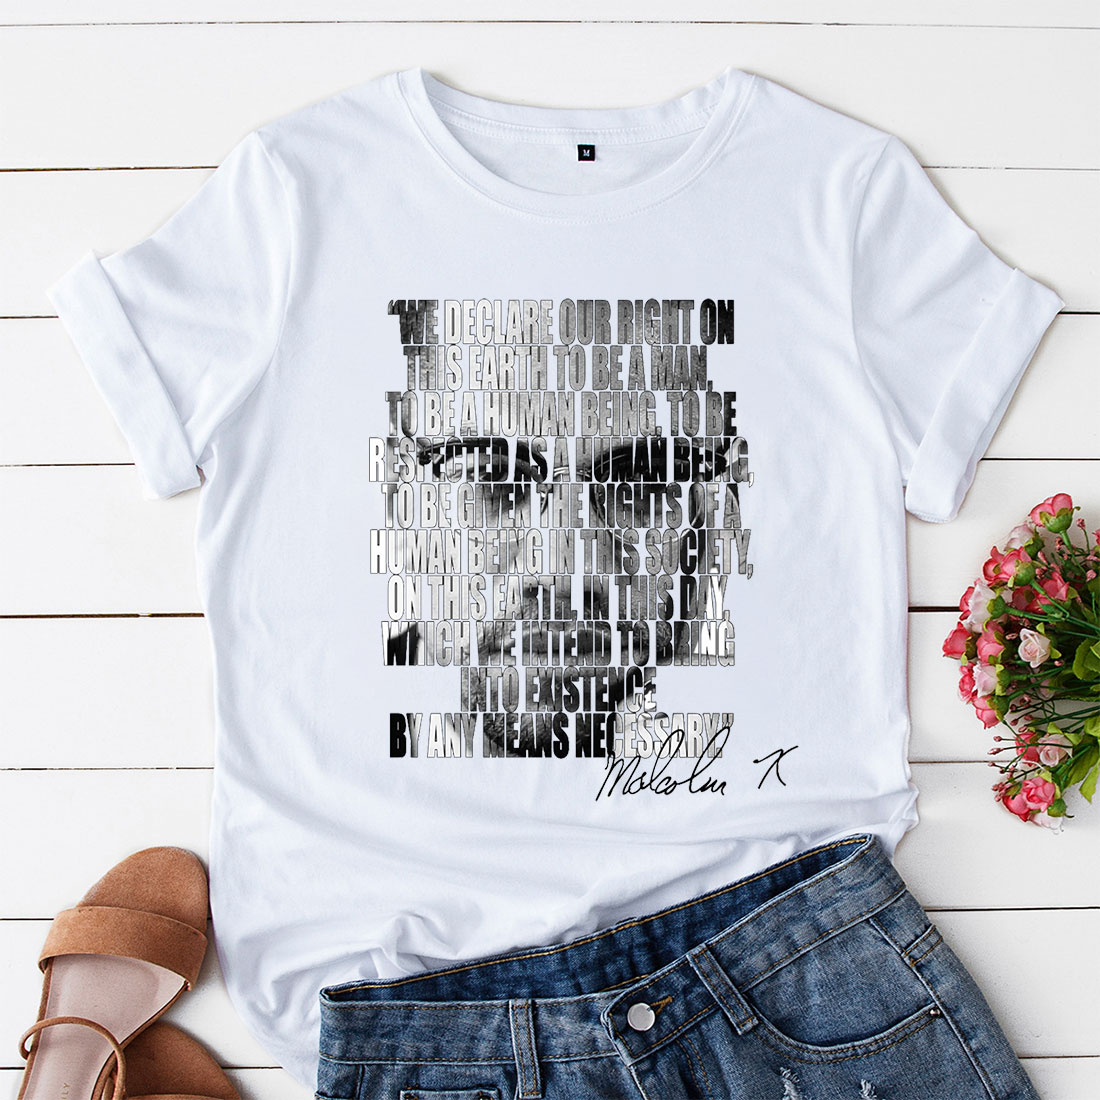 malcolm x by any means necessary shirt